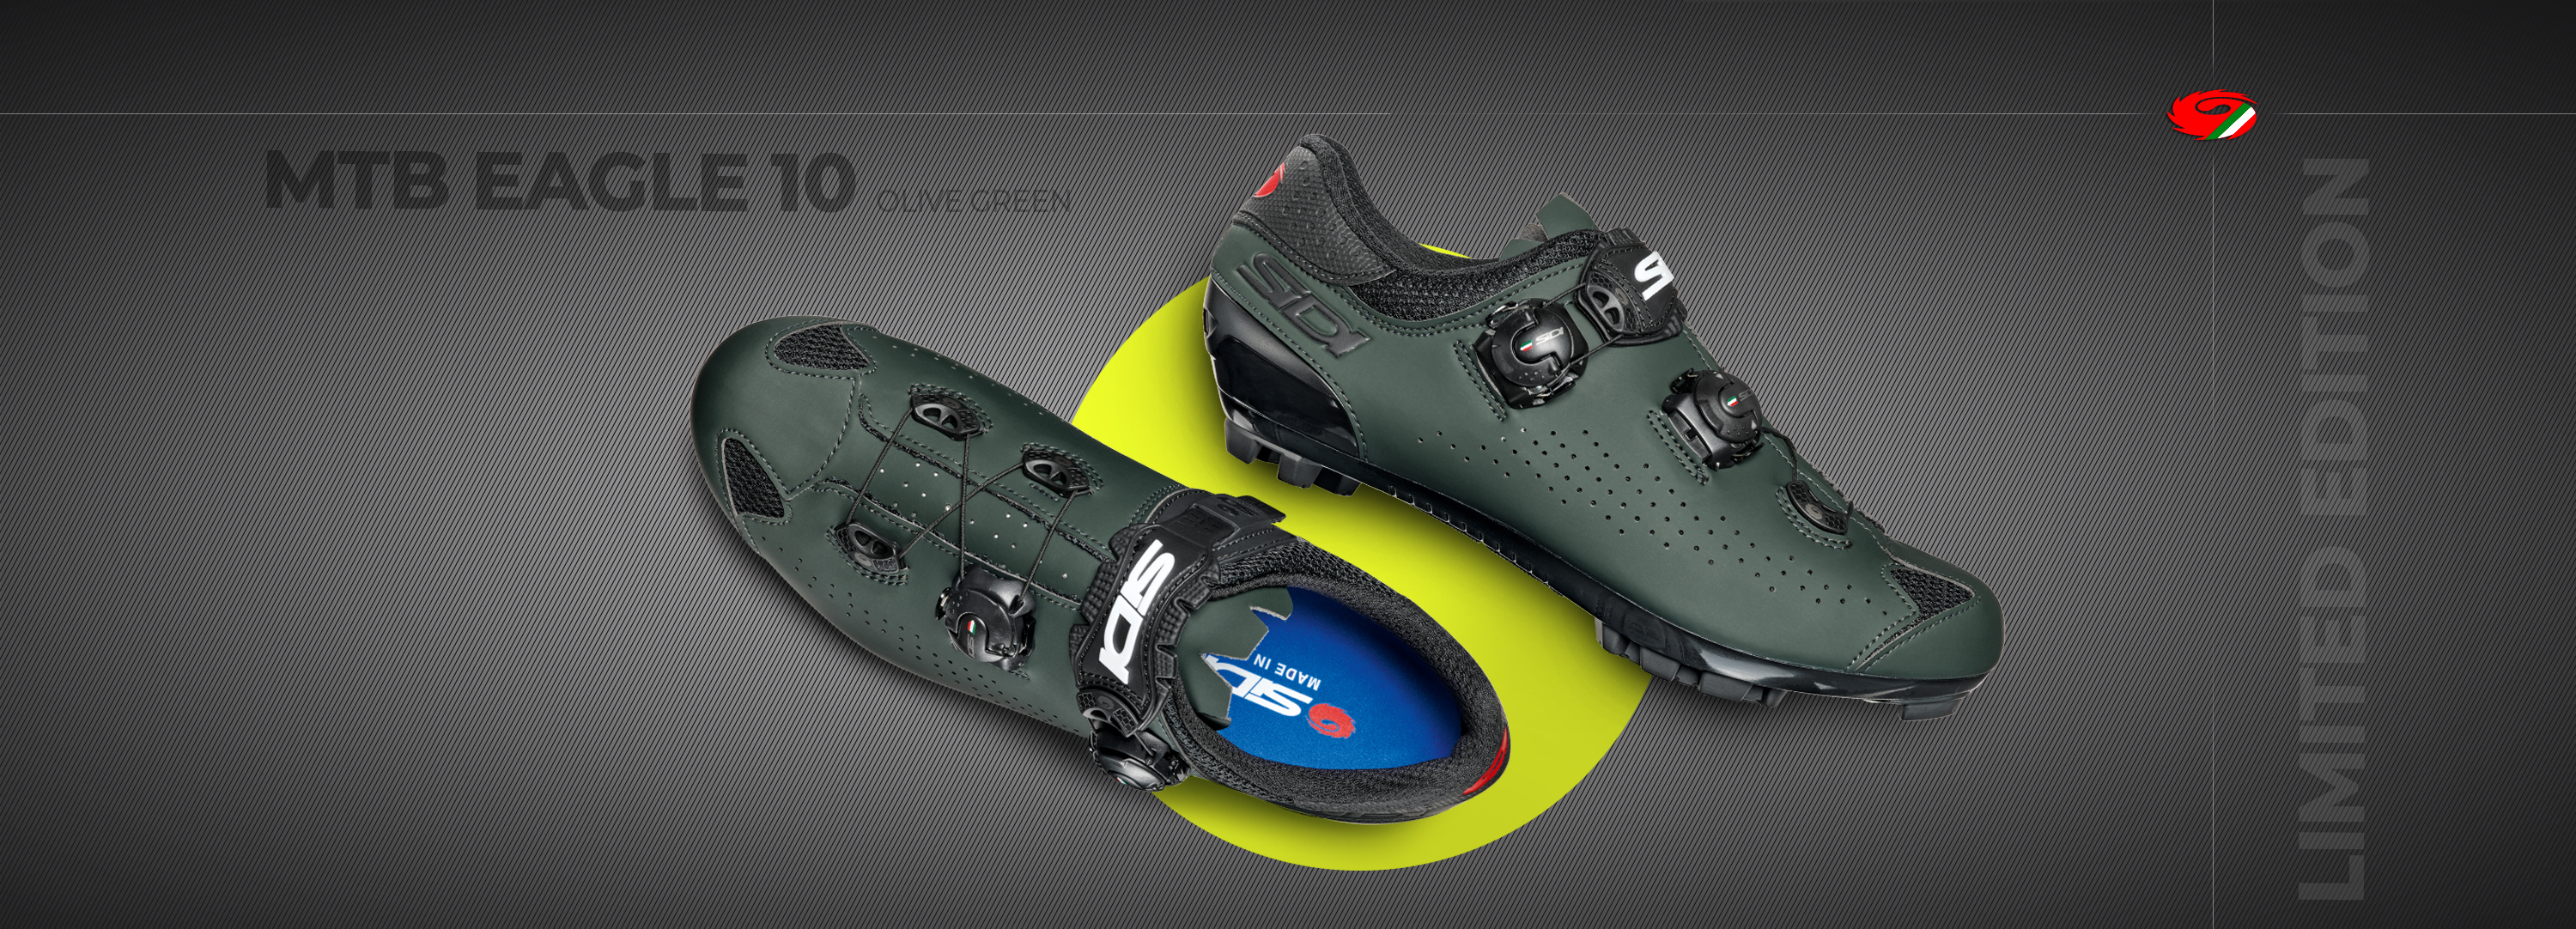 Sidi launches a new nature-inspired colour for the MTB-Eagle 10